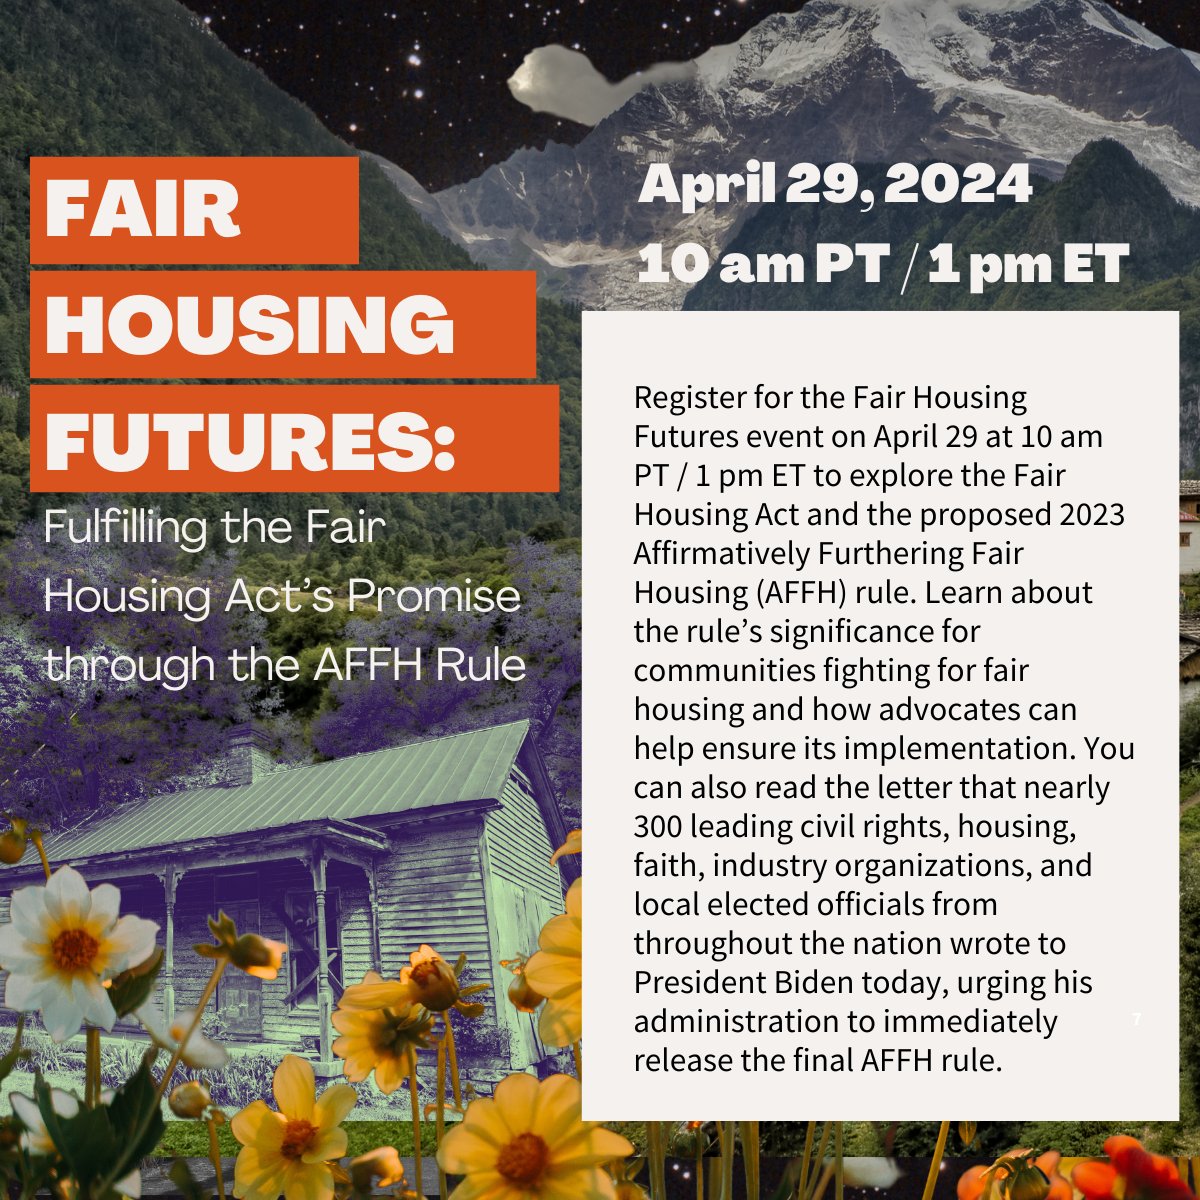 Learn more about Affirmatively Furthering Fair Housing (#AFFH) on an upcoming webinar today, April 29, 2024, at 10:00 AM PT / 1:00 PM ET. There's still time to register for this virtual webinar at plcylk.org/fair-housing-f…